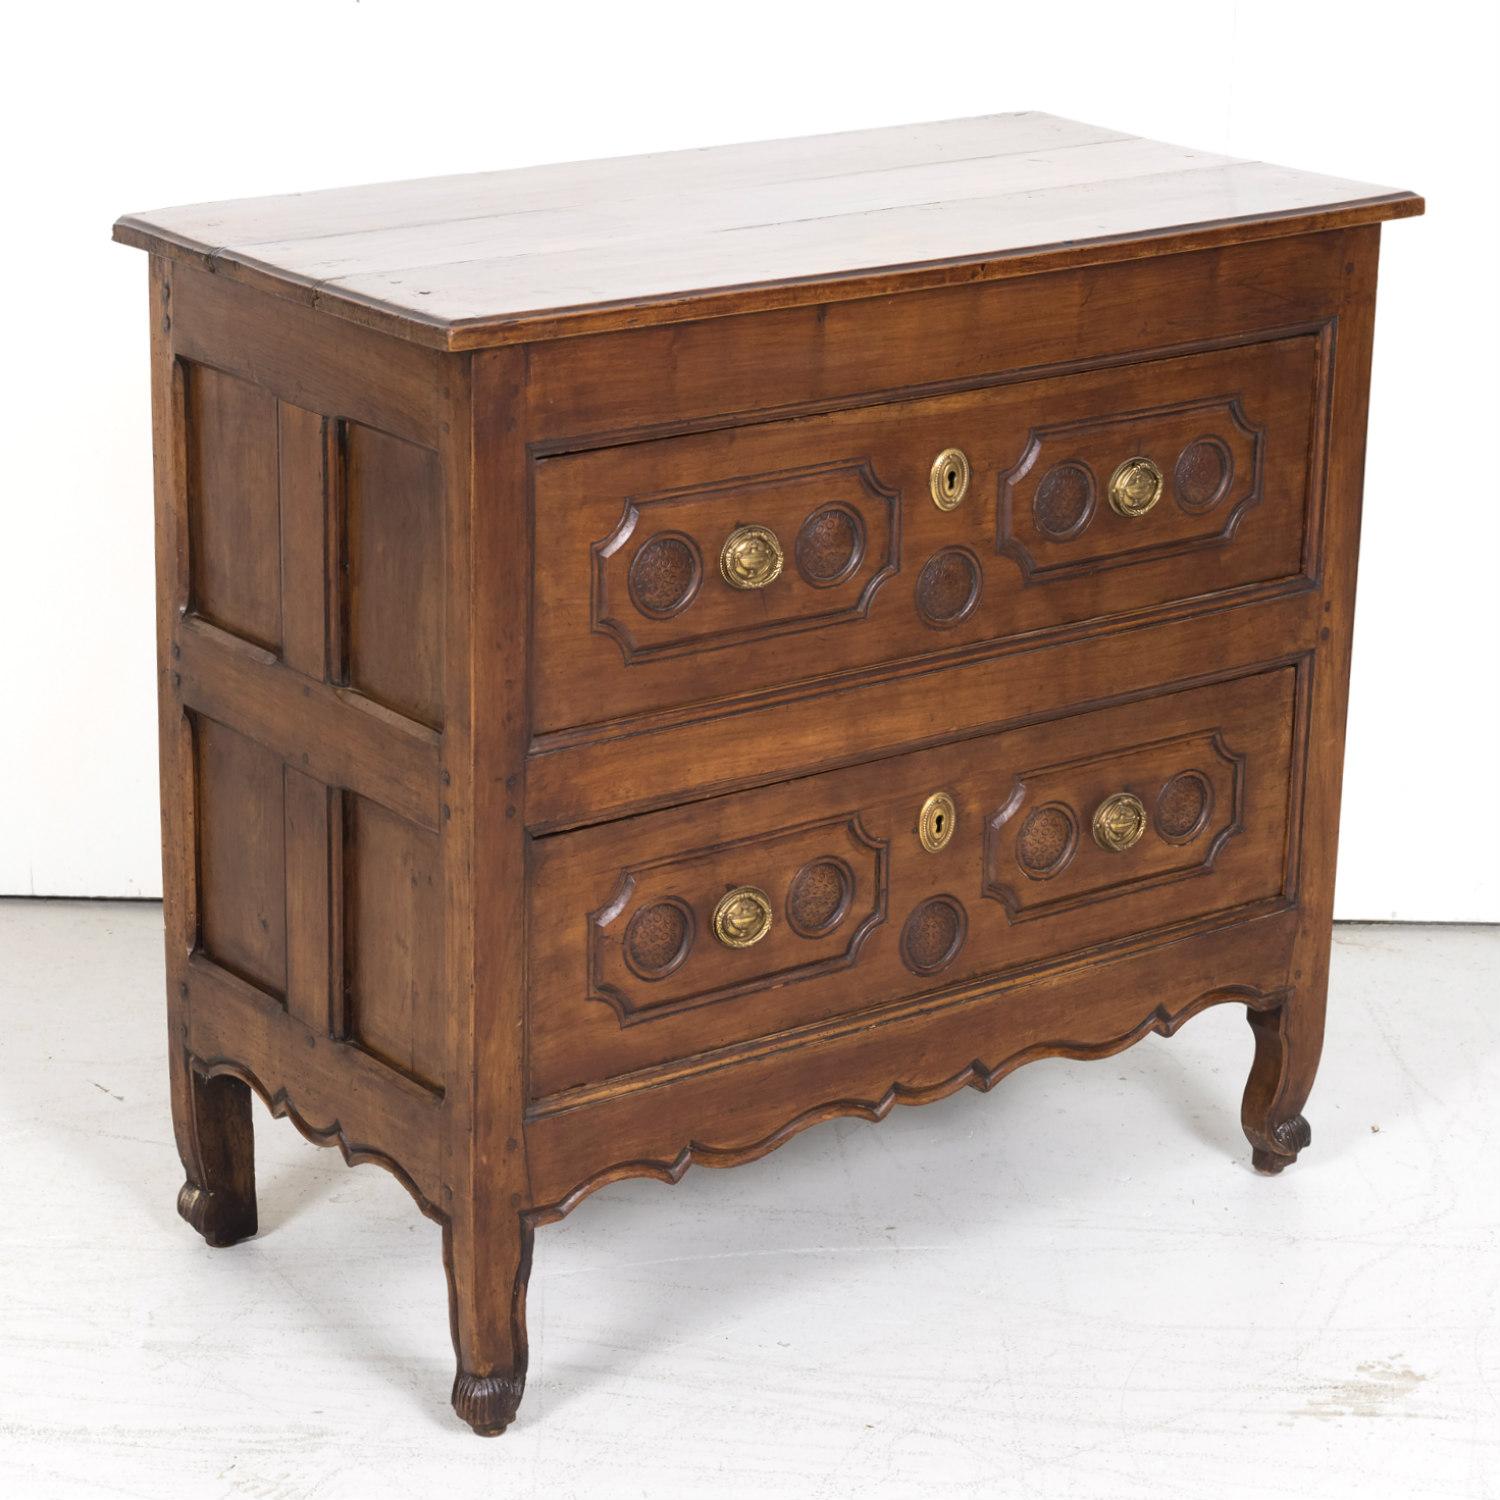 An exceptional 18th century French Louis XV period solid cherry provincial commode handcrafted by master artisans near Lyon, circa 1740s, having a rectangular plank top above two full length drawers with shaped raised panel moldings featuring